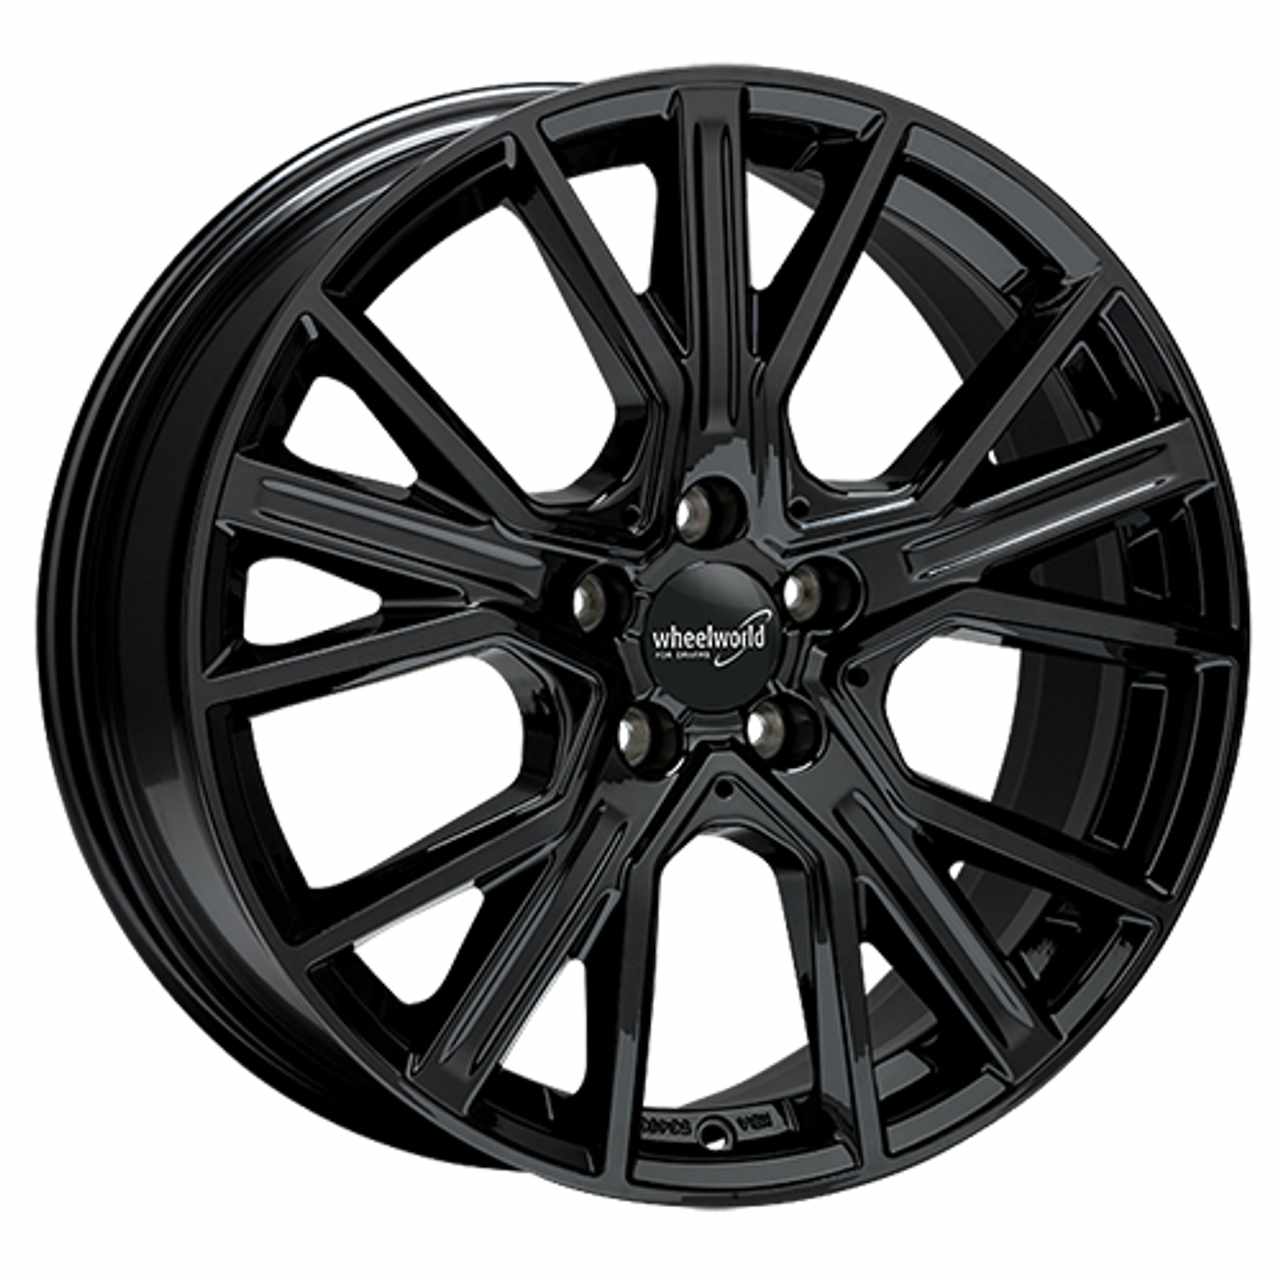 WHEELWORLD-2DRV WH34 black glossy painted 8.5Jx19 5x112 ET30